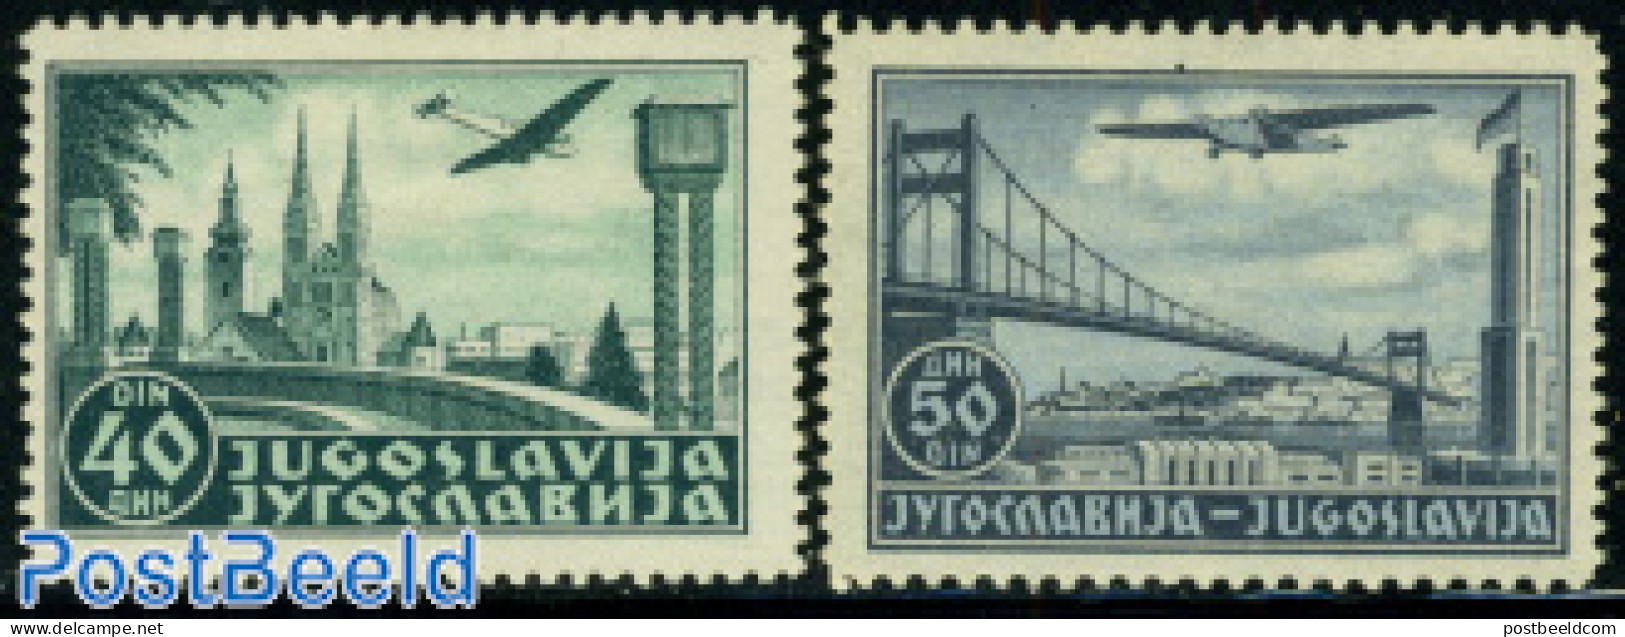 Yugoslavia 1940 Aeroplanes Over Landscapes 2v, Mint NH, Religion - Transport - Churches, Temples, Mosques, Synagogues .. - Unused Stamps